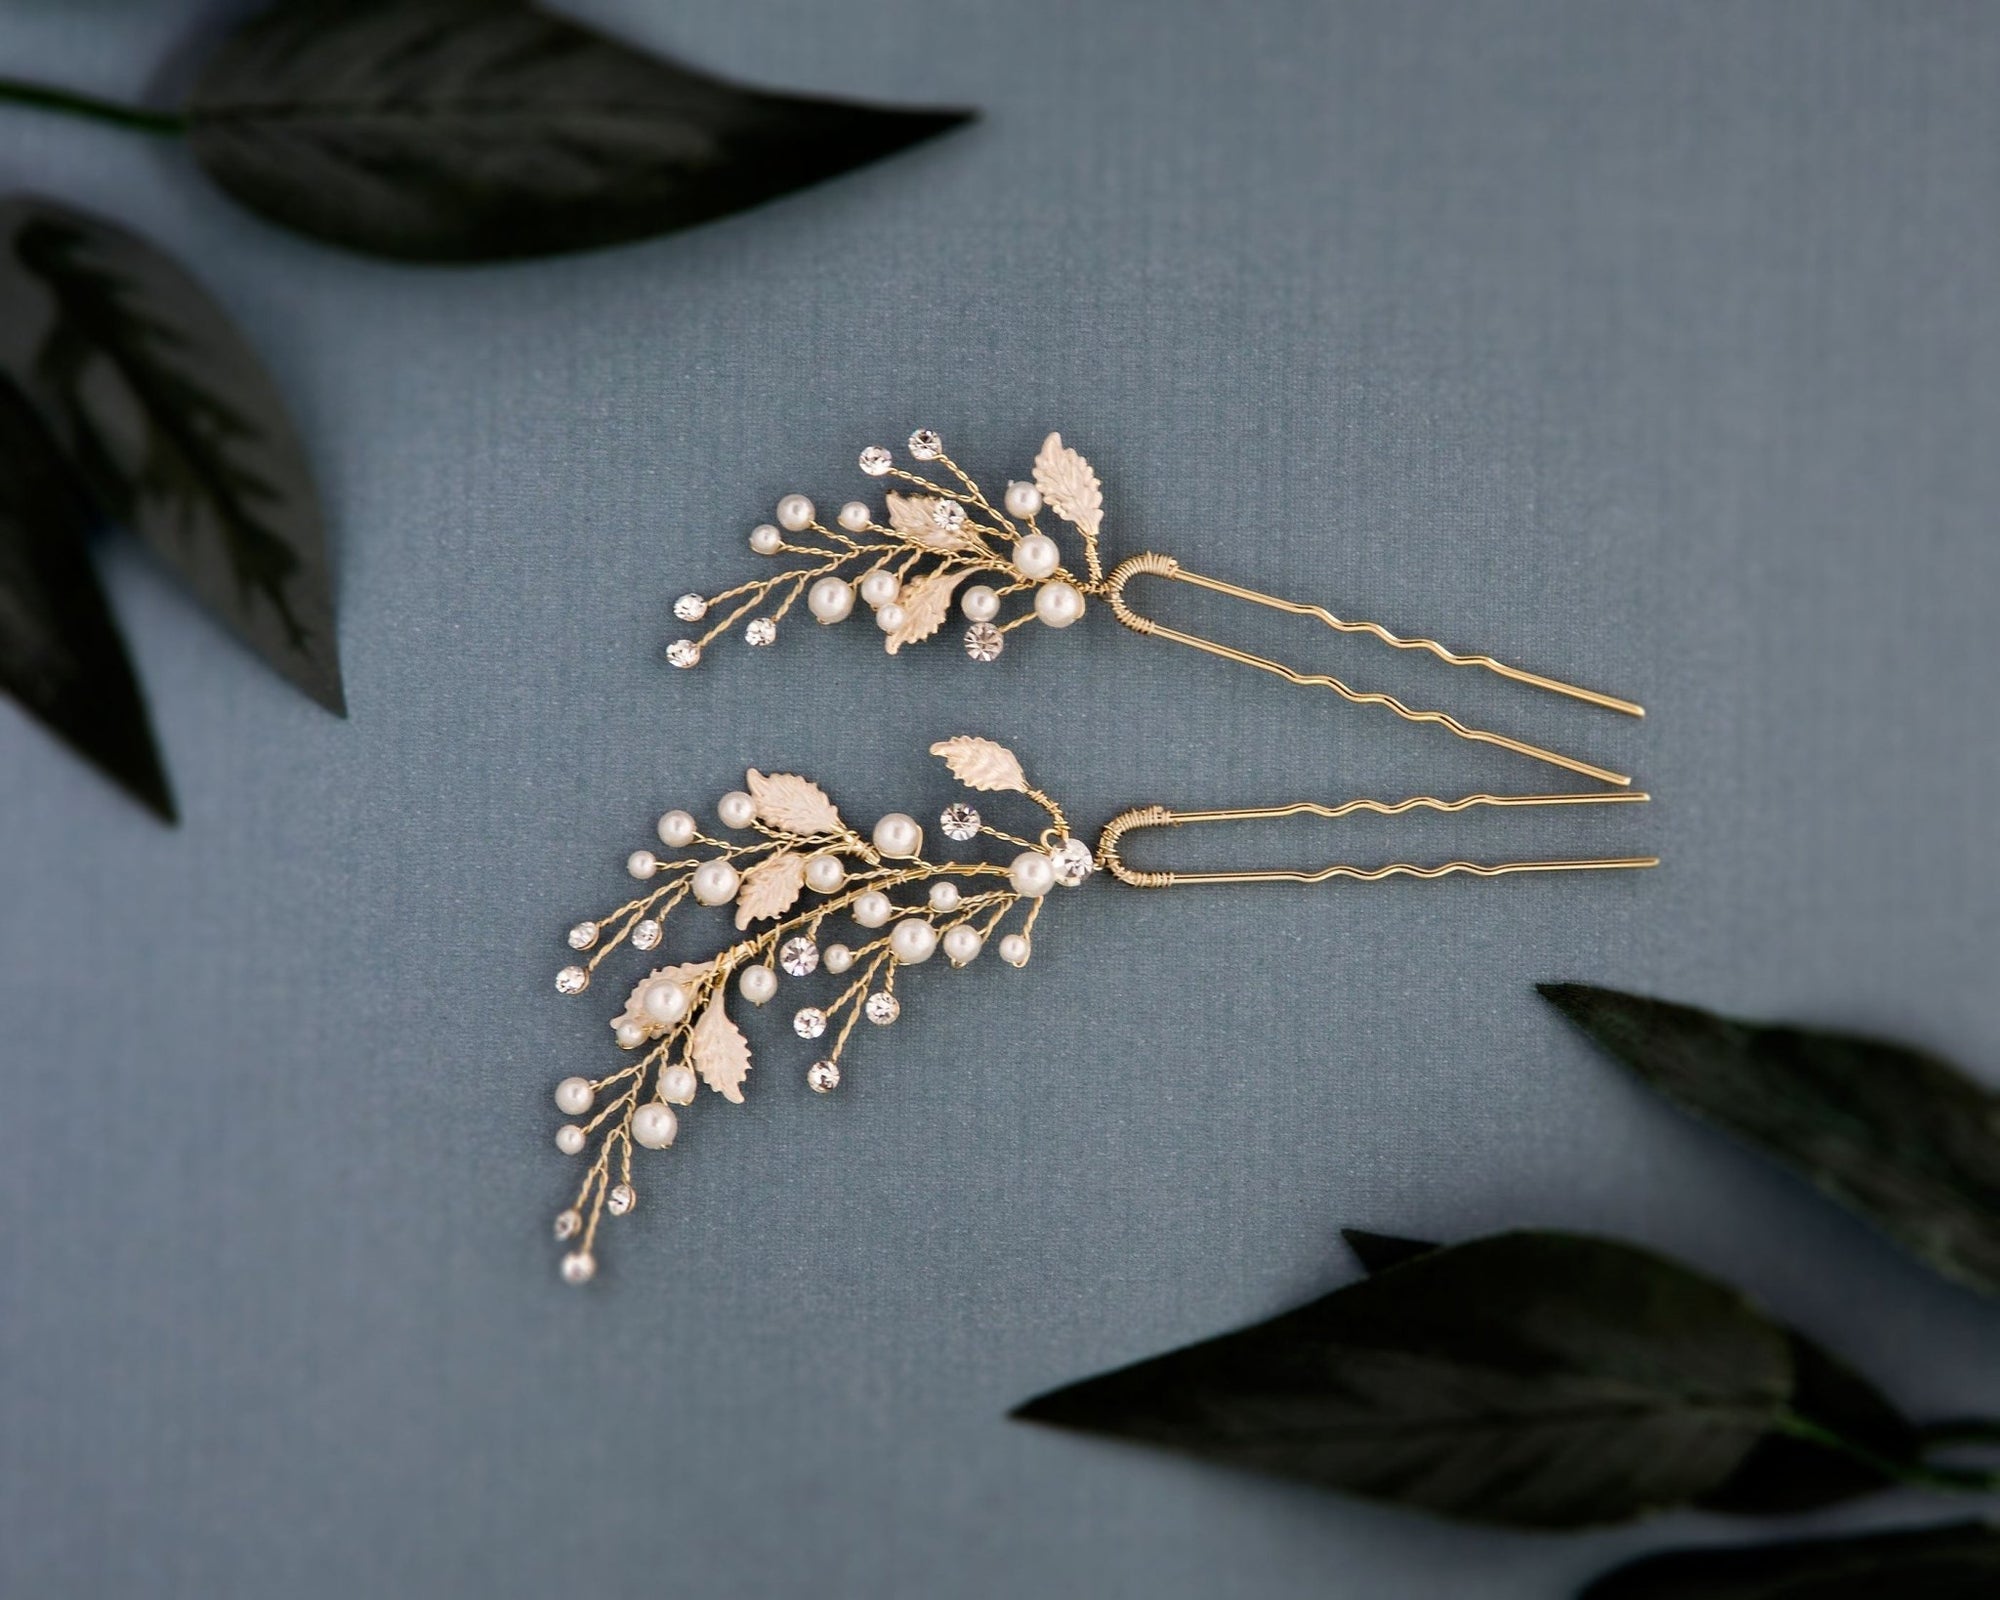 Freshwater Pearl Bridal Hair Pin Set of 2 by Twigs & Honey - Baby's Breath Pearl and Crystal Pin Set of 2 - Style #2114 Gold